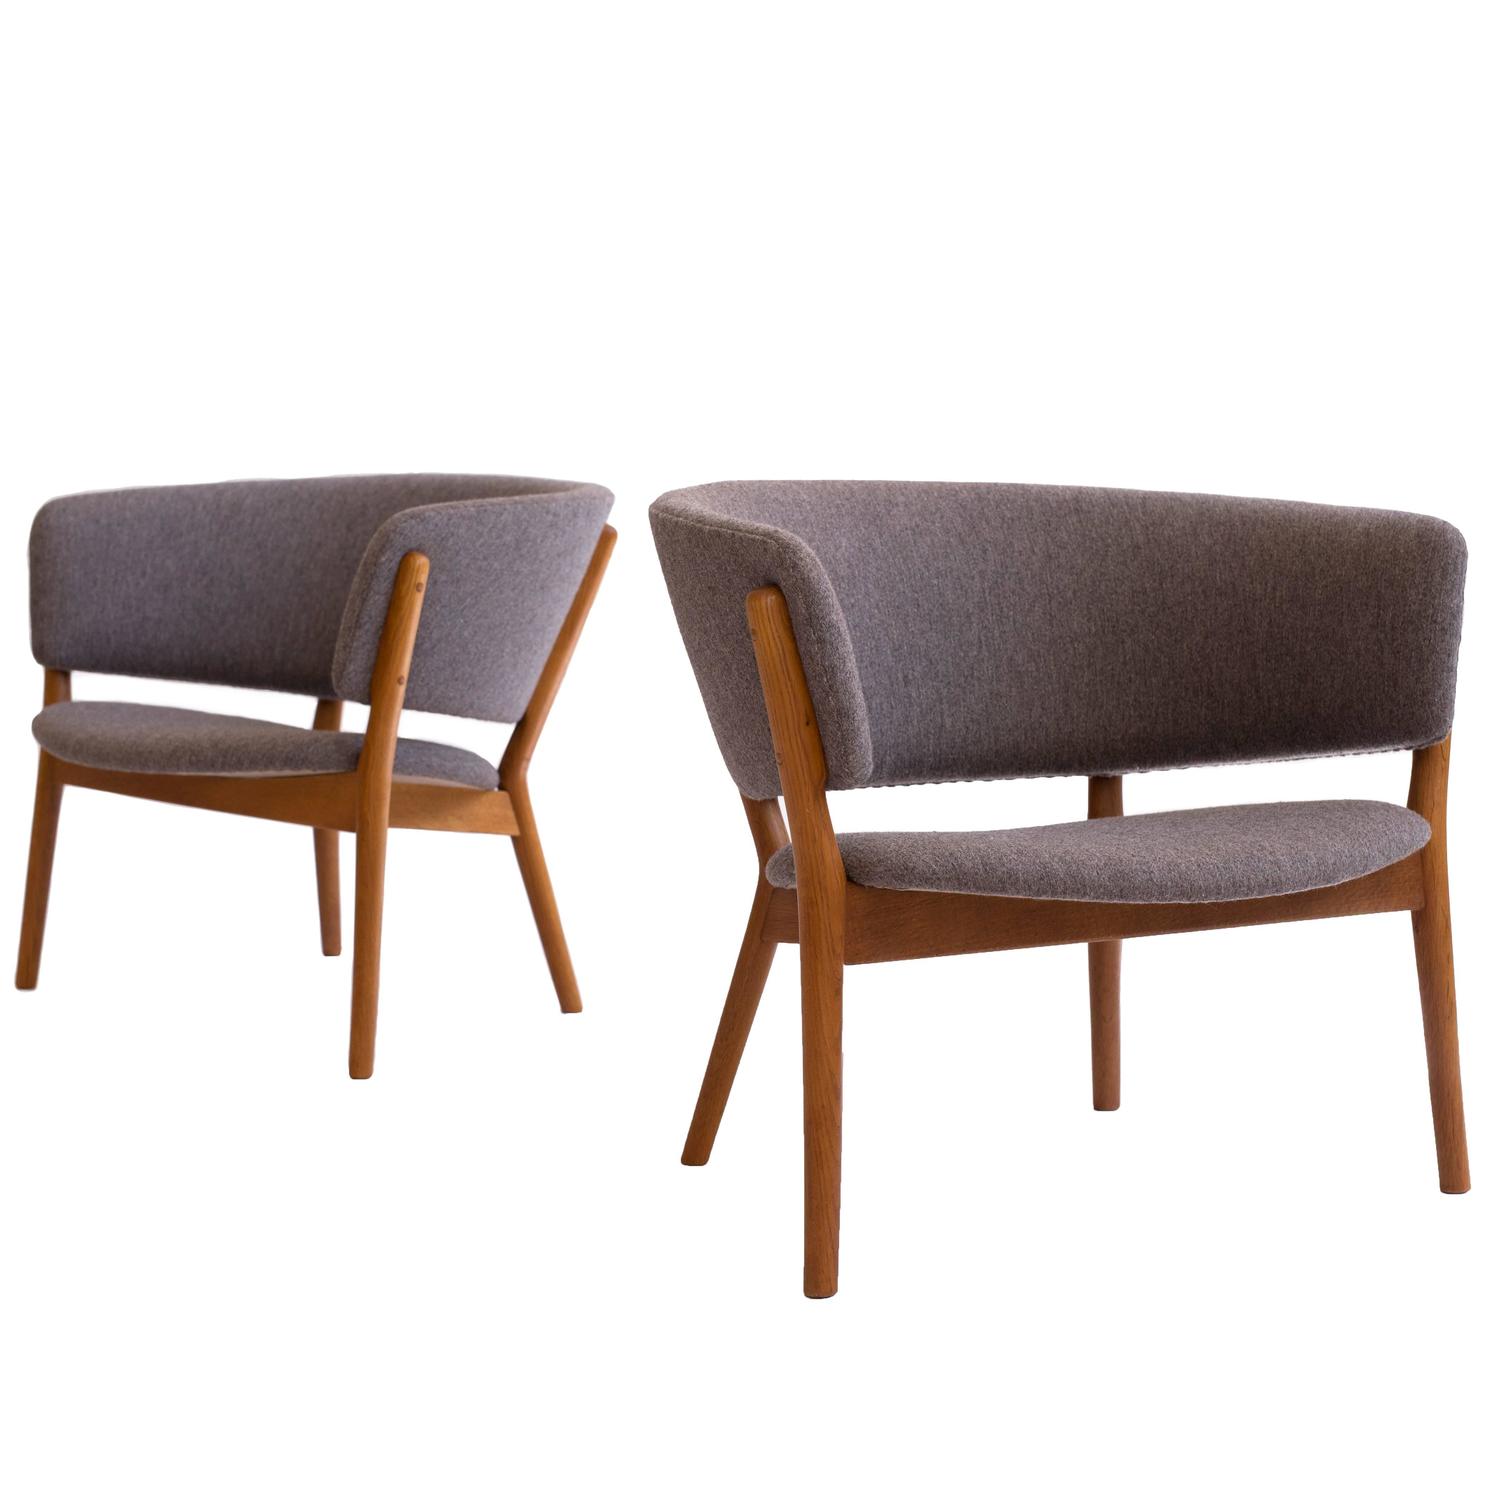 Pair of Nanna Ditzel ND83 Easy Chairs For Sale at 1stdibs